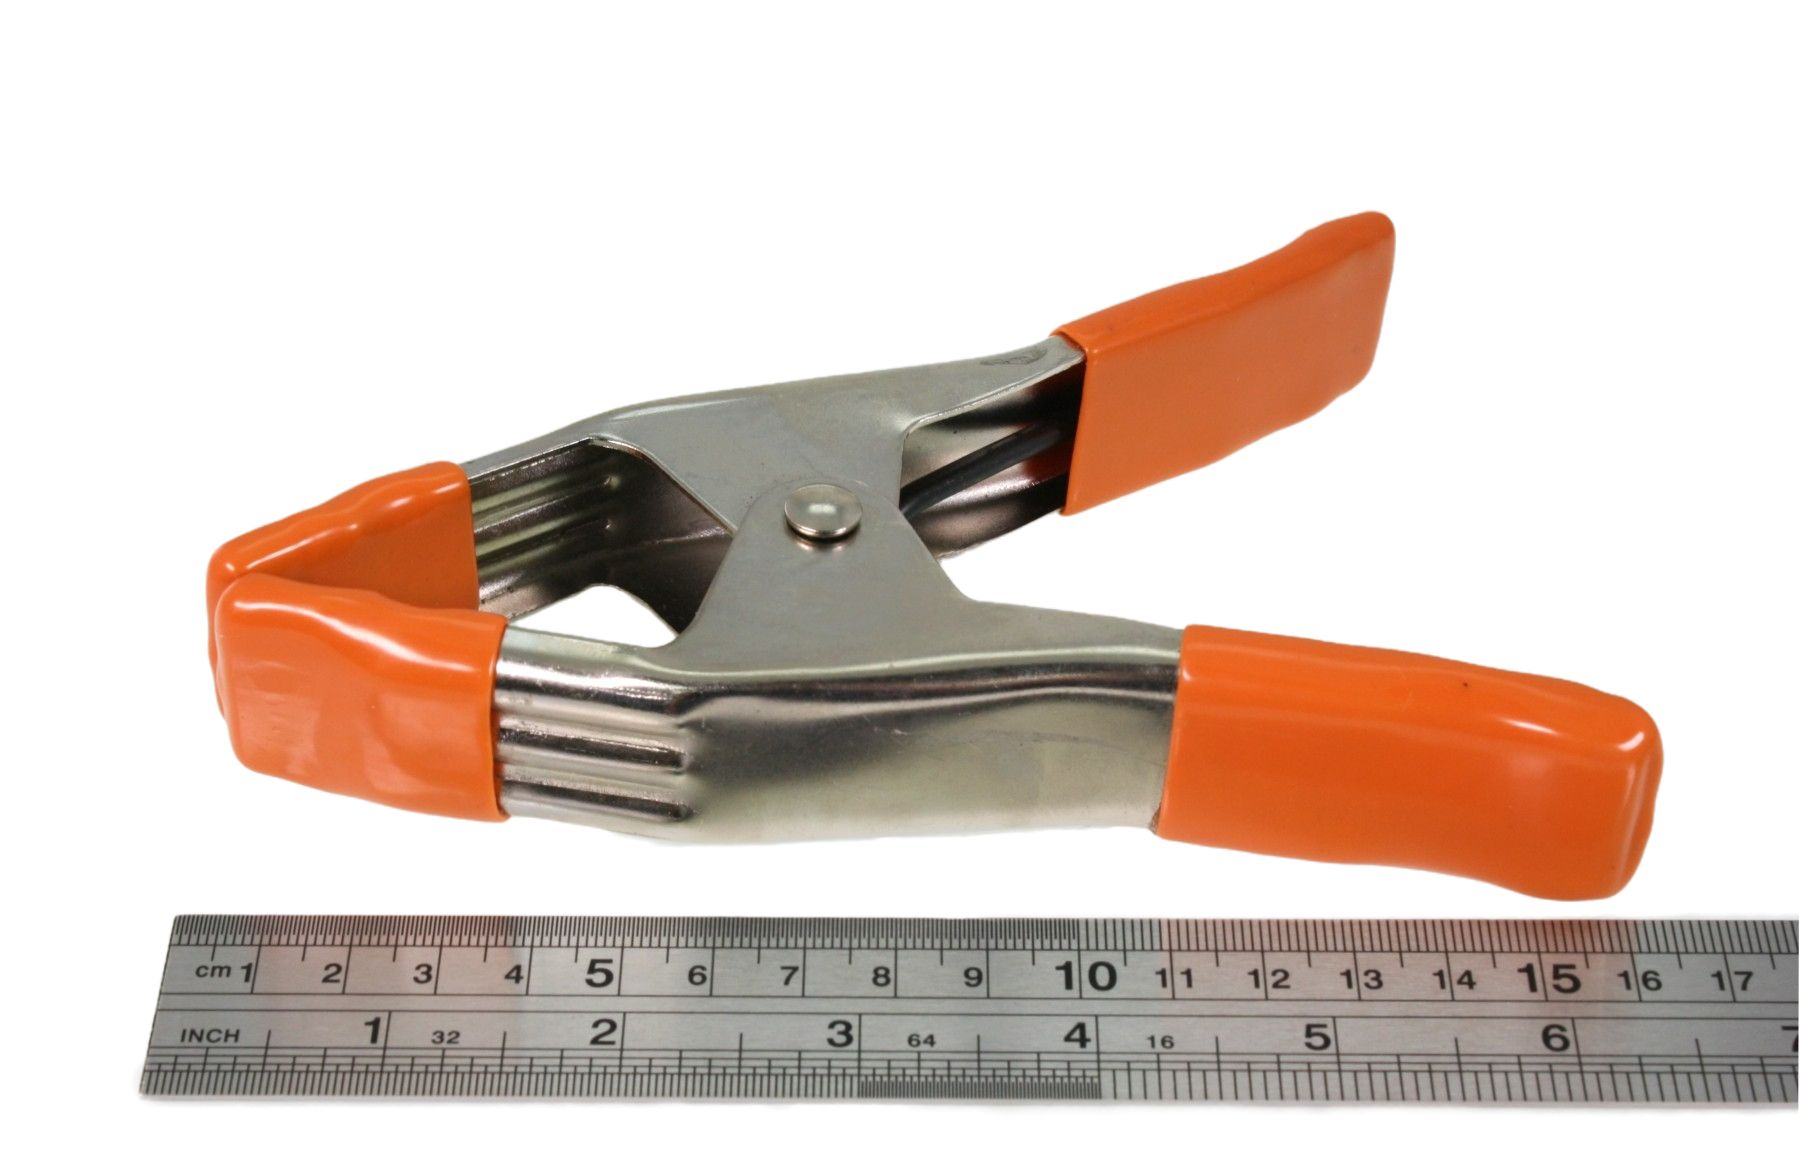 50mm clamp next to a ruler